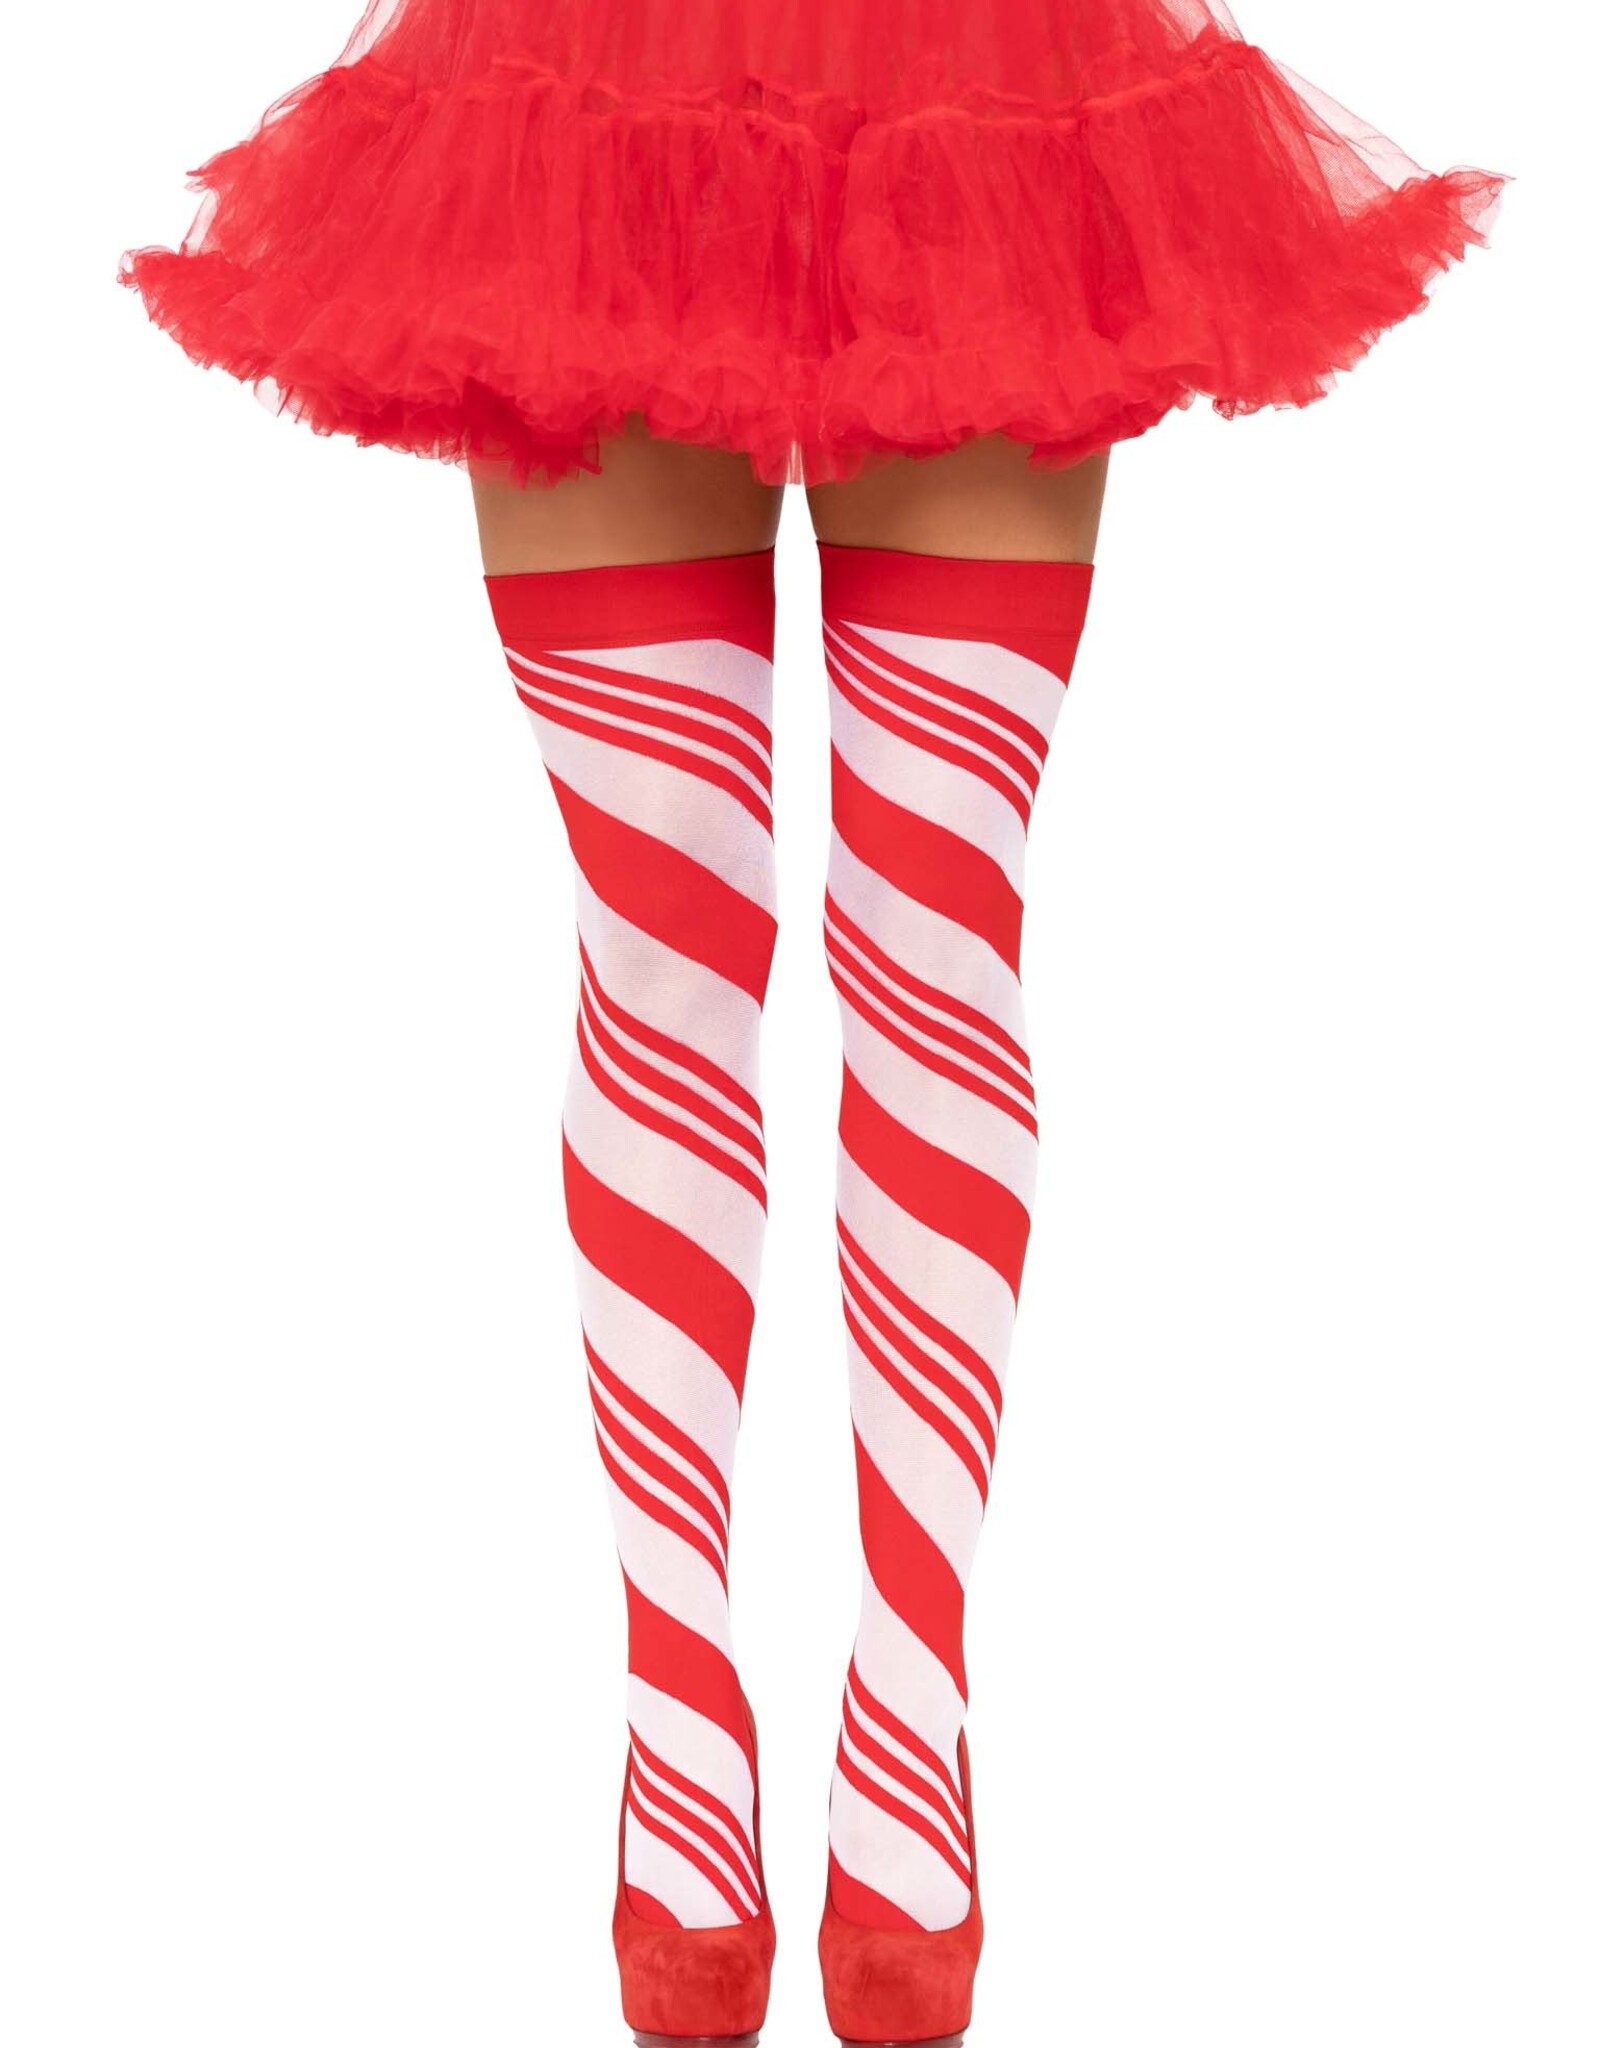 THIGH HIGH-XMAS-CANDY CANE RED/WHT